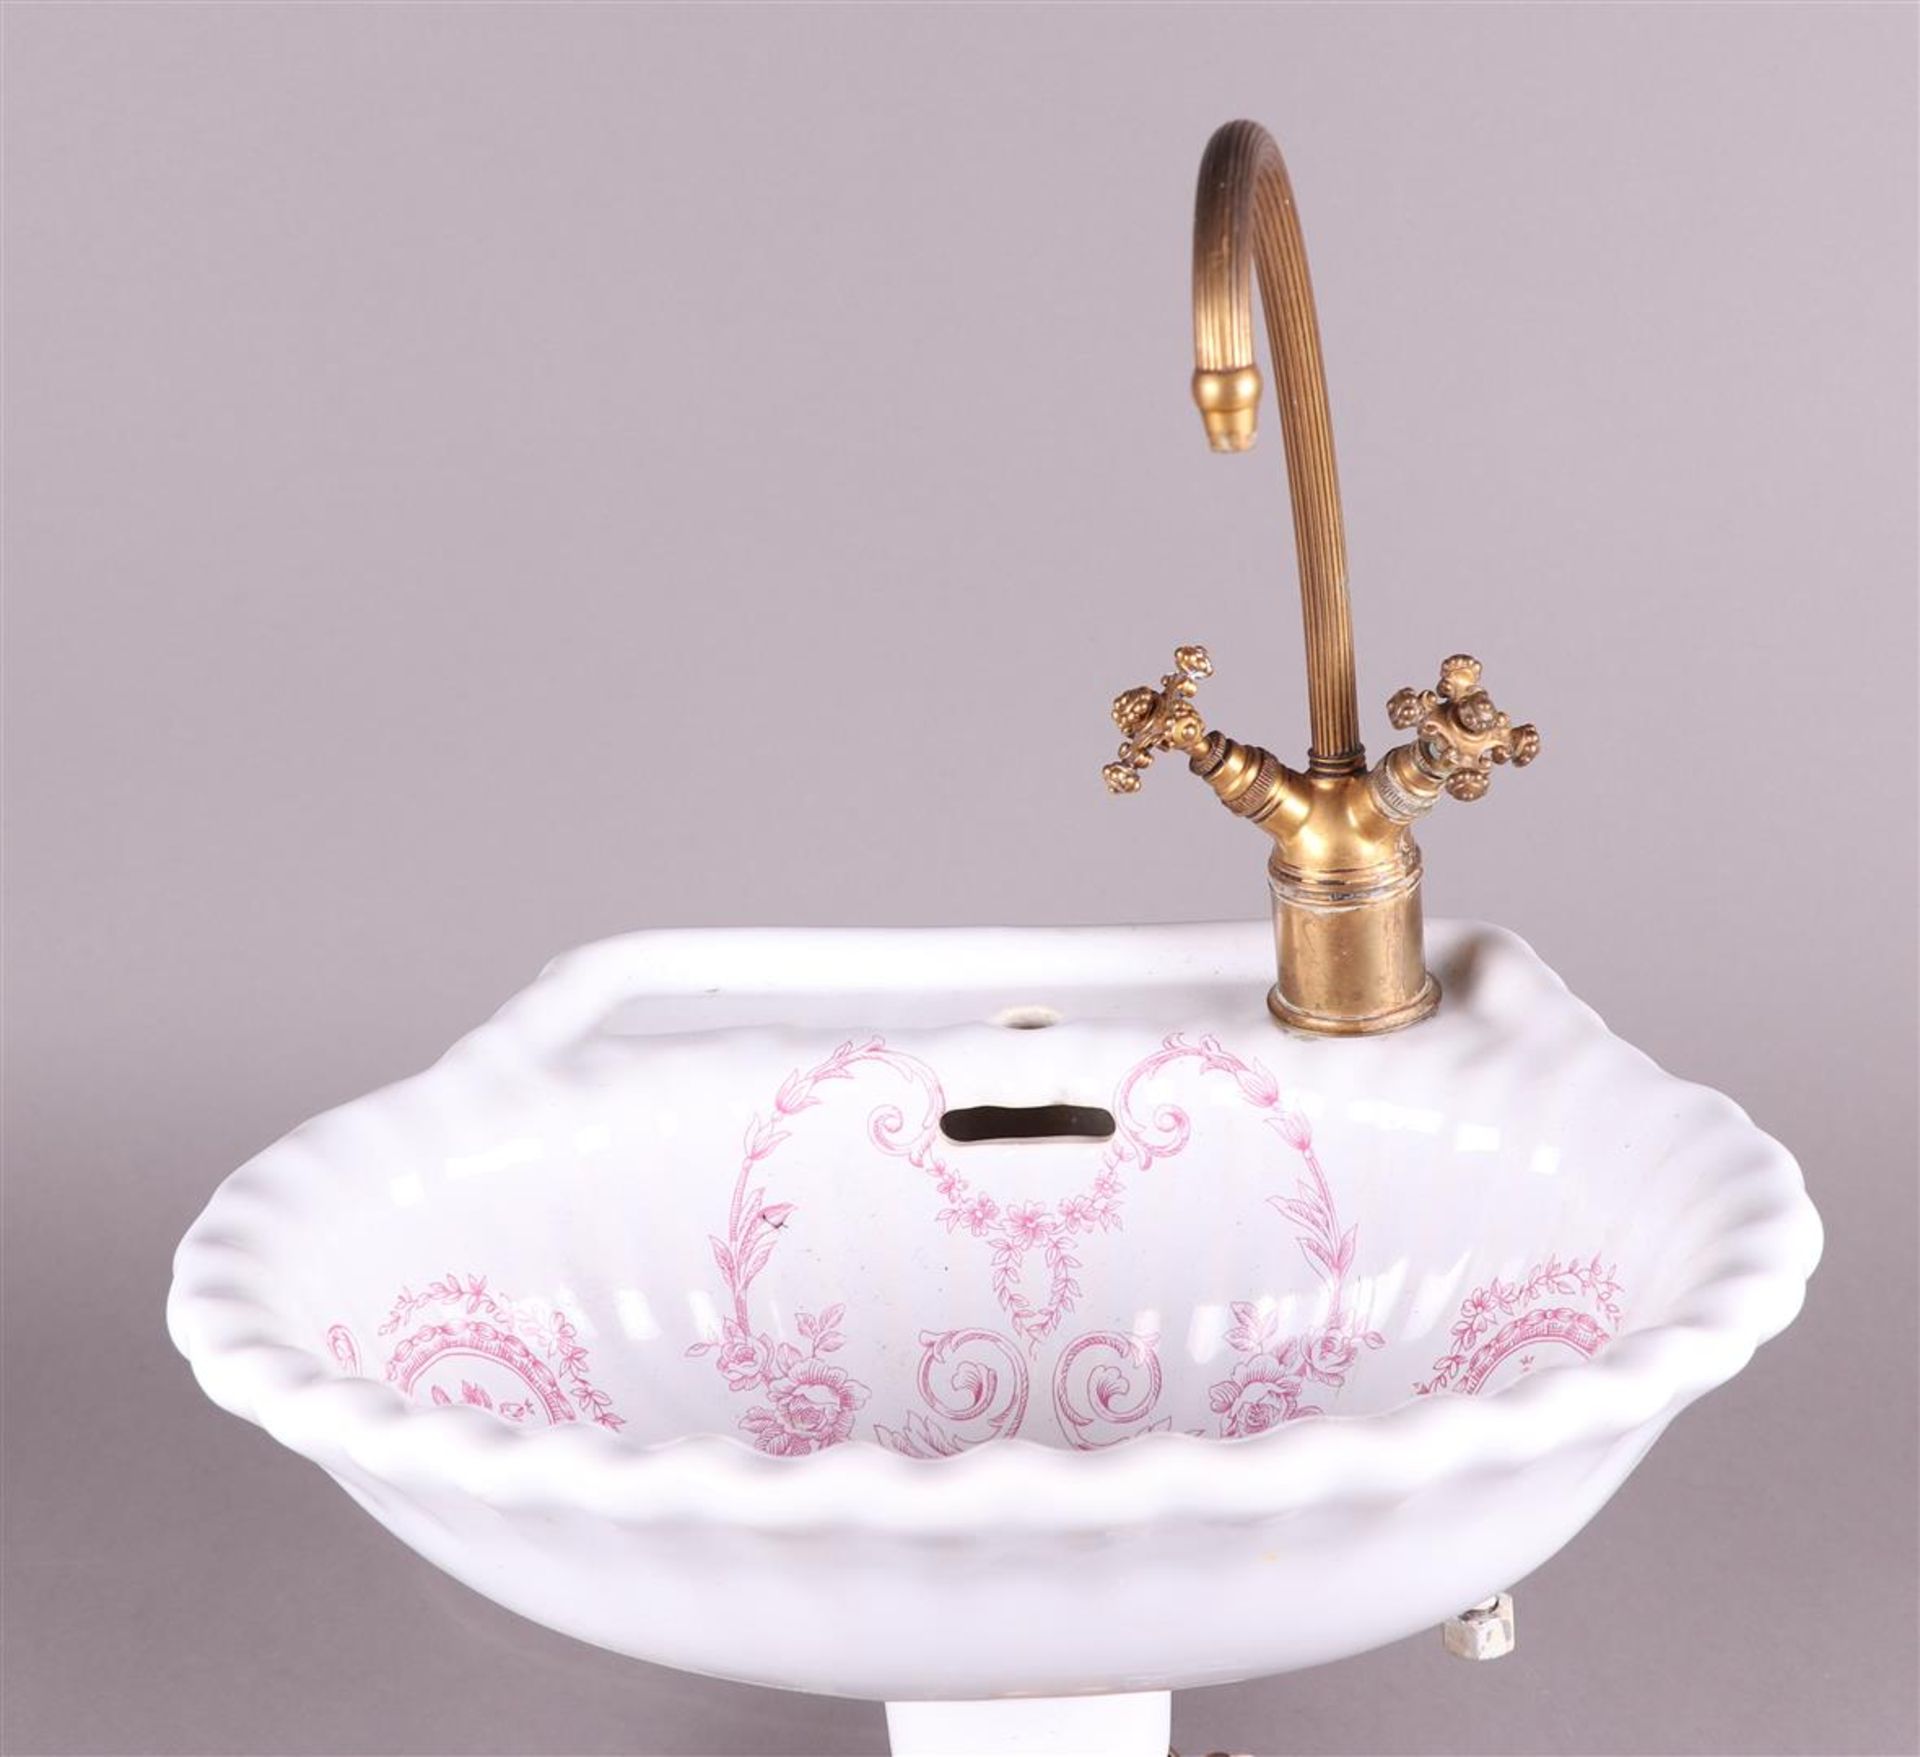 An earthenware sink decorated with flowers and a brass faucet. Early 20th century.